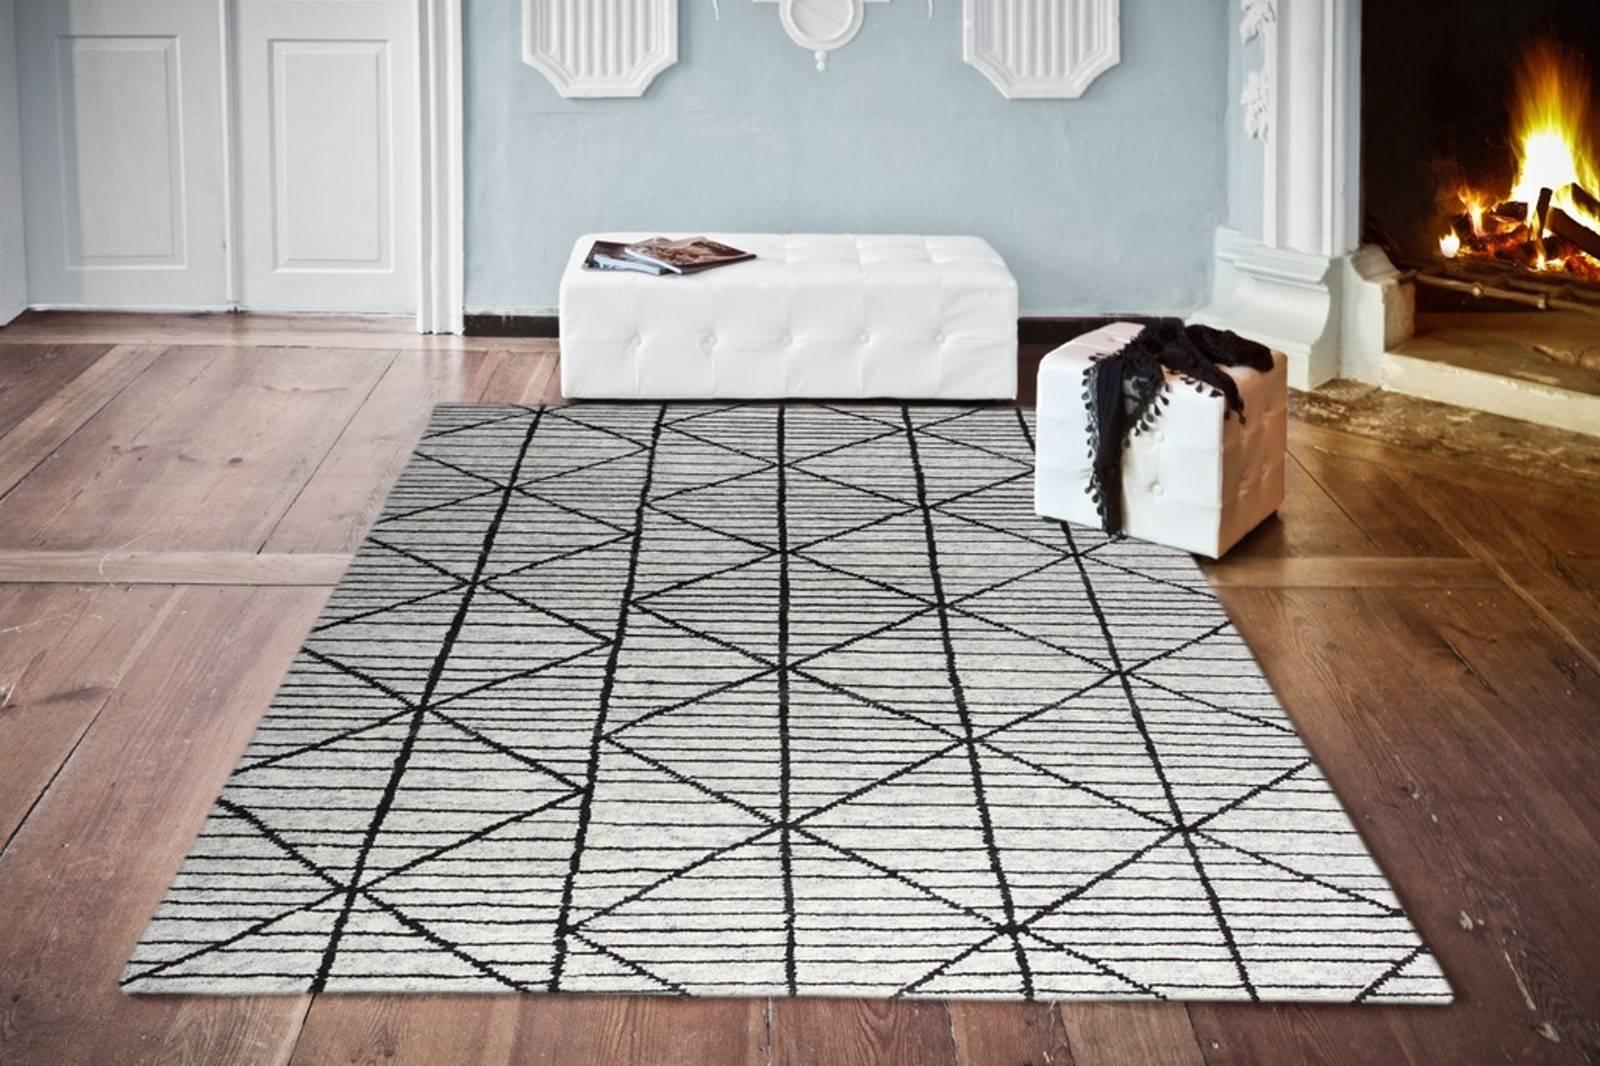 Indian Contemporary Modern Design Rug Hand-Knotted Beige Grey Brown Moroccan Inspired 